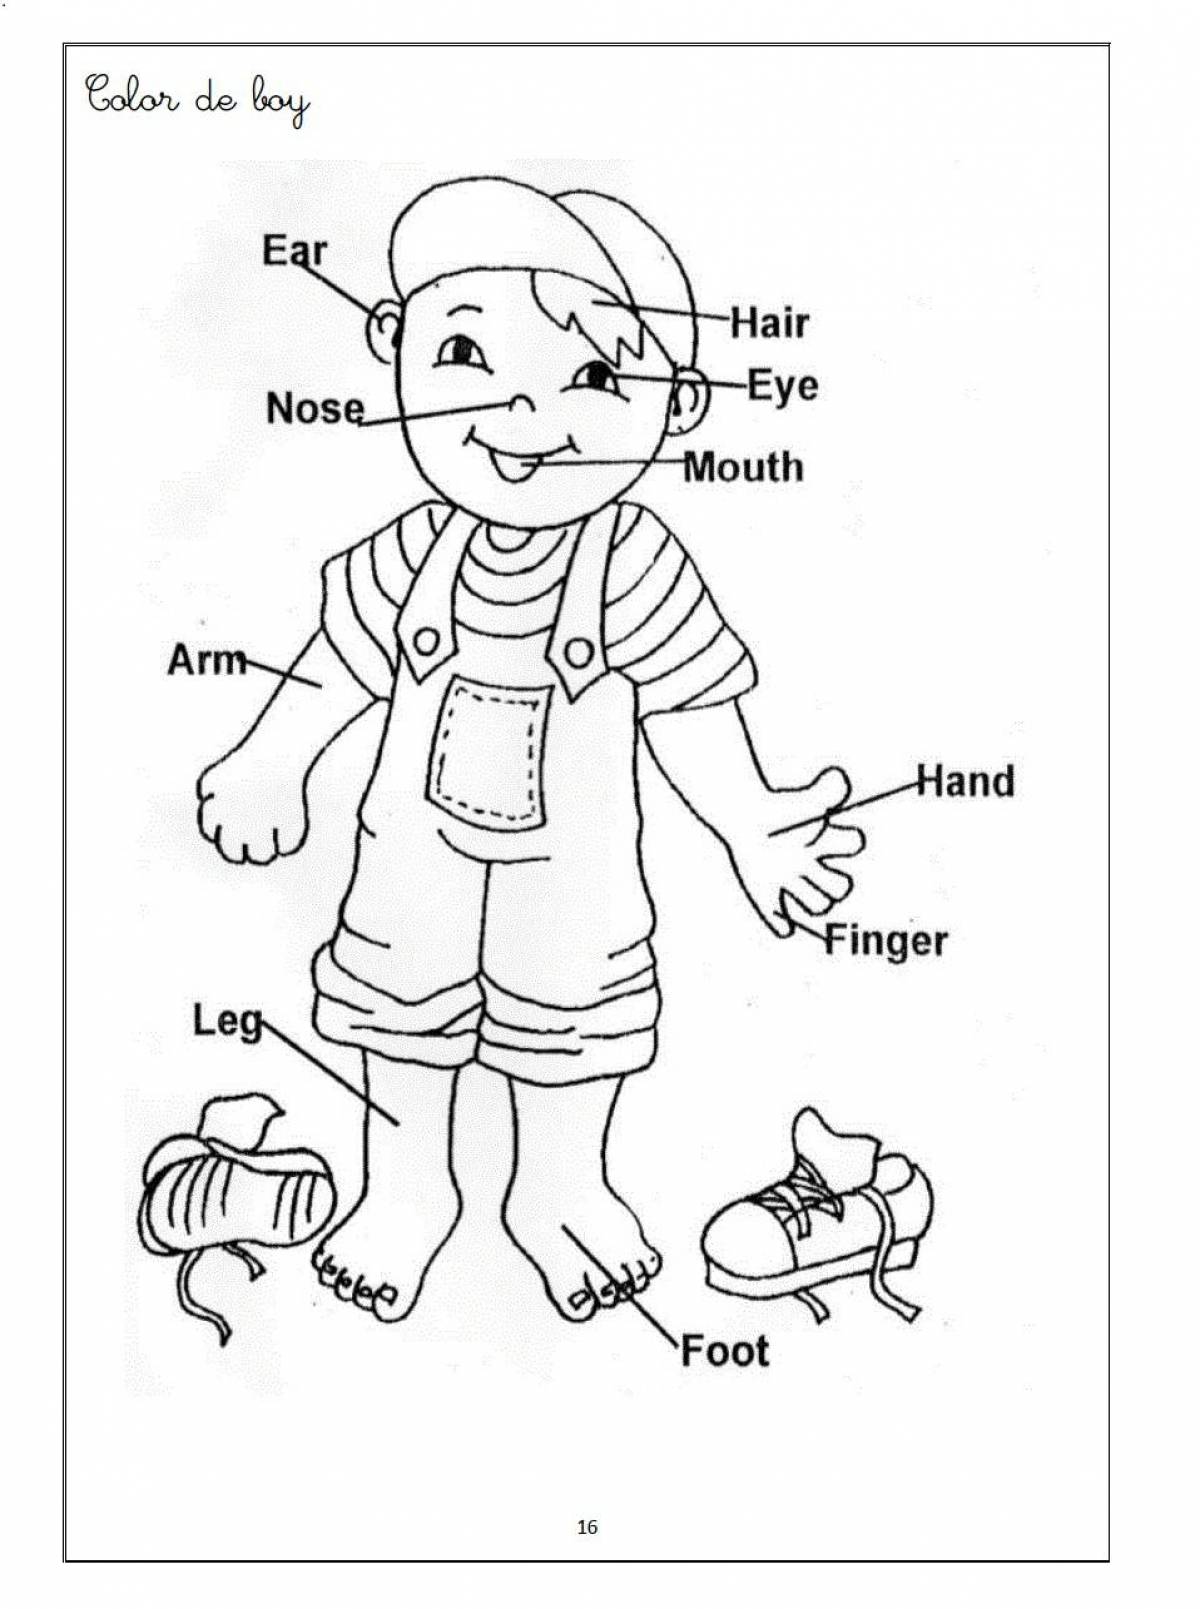 Coloring parts of the body for children